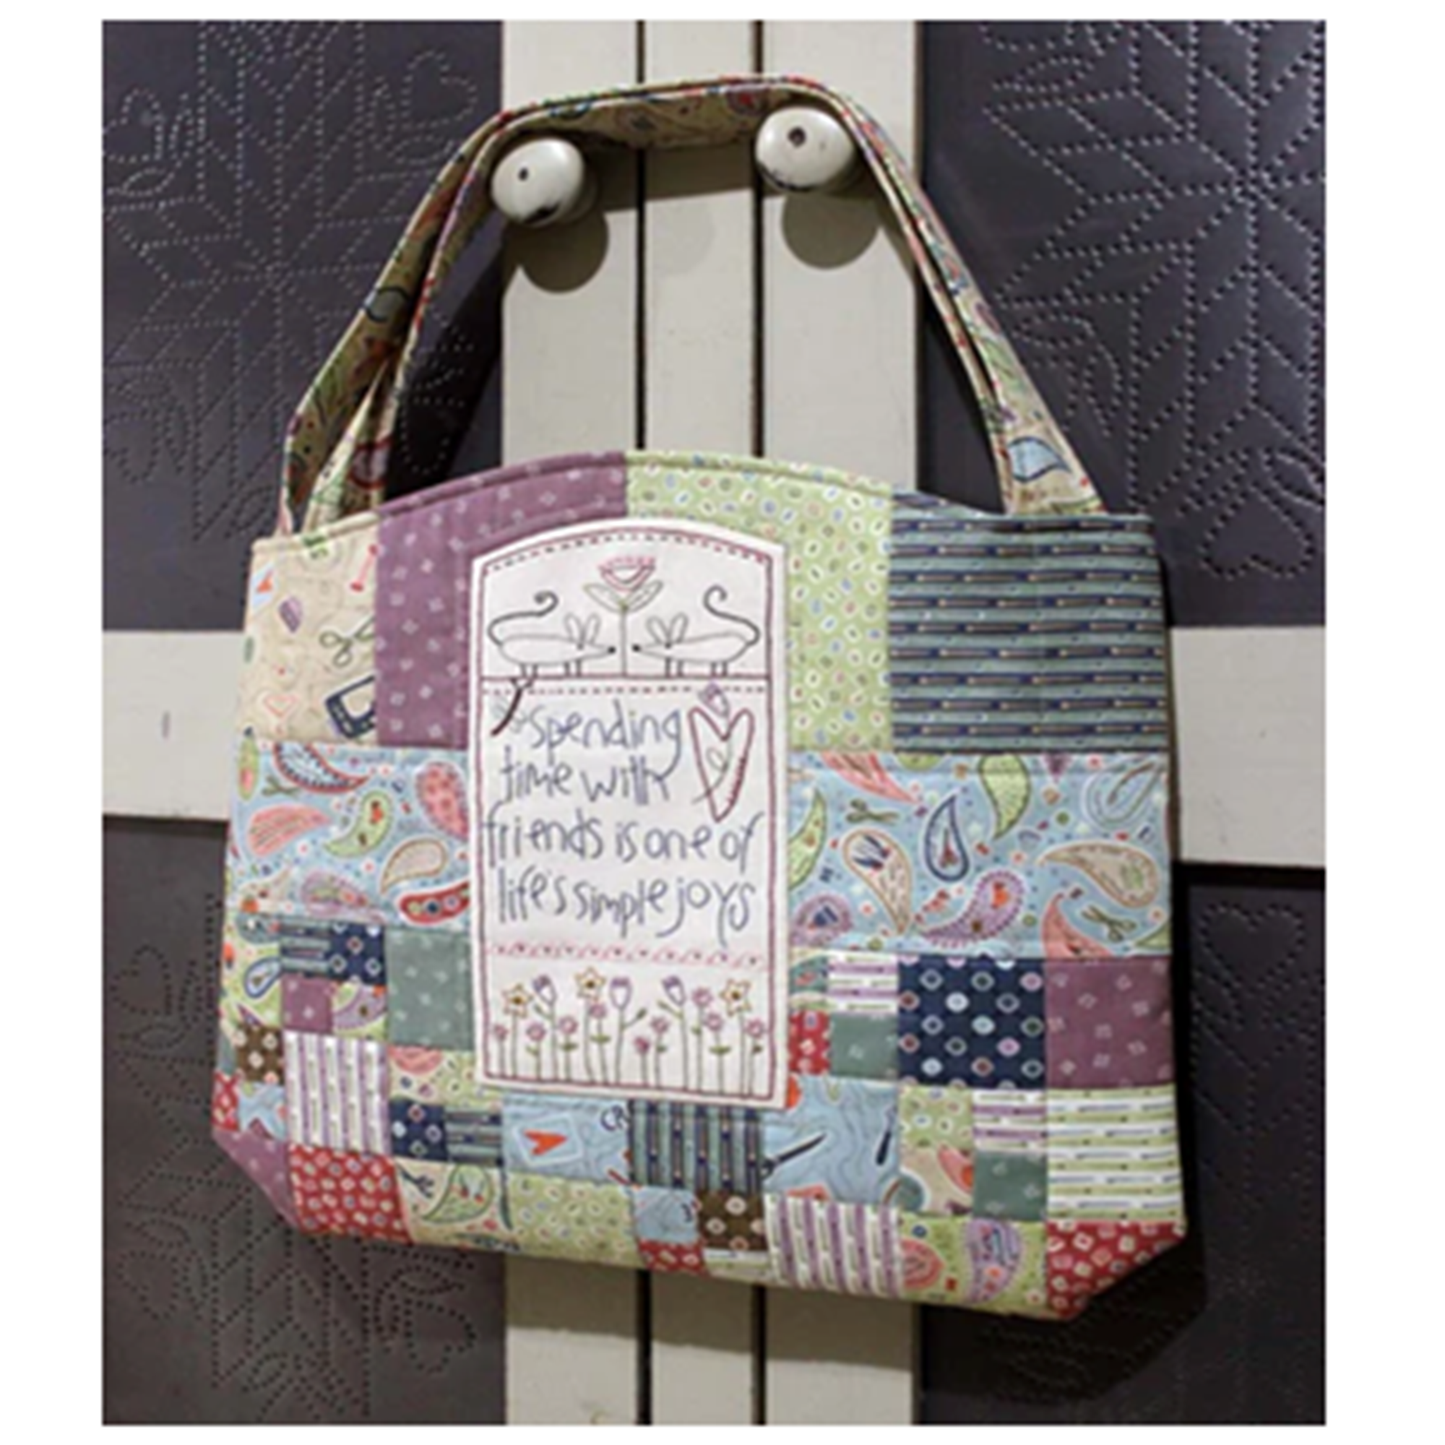 Sunshiny Day embroidered patchwork tote bag Birdhouse paper pattern